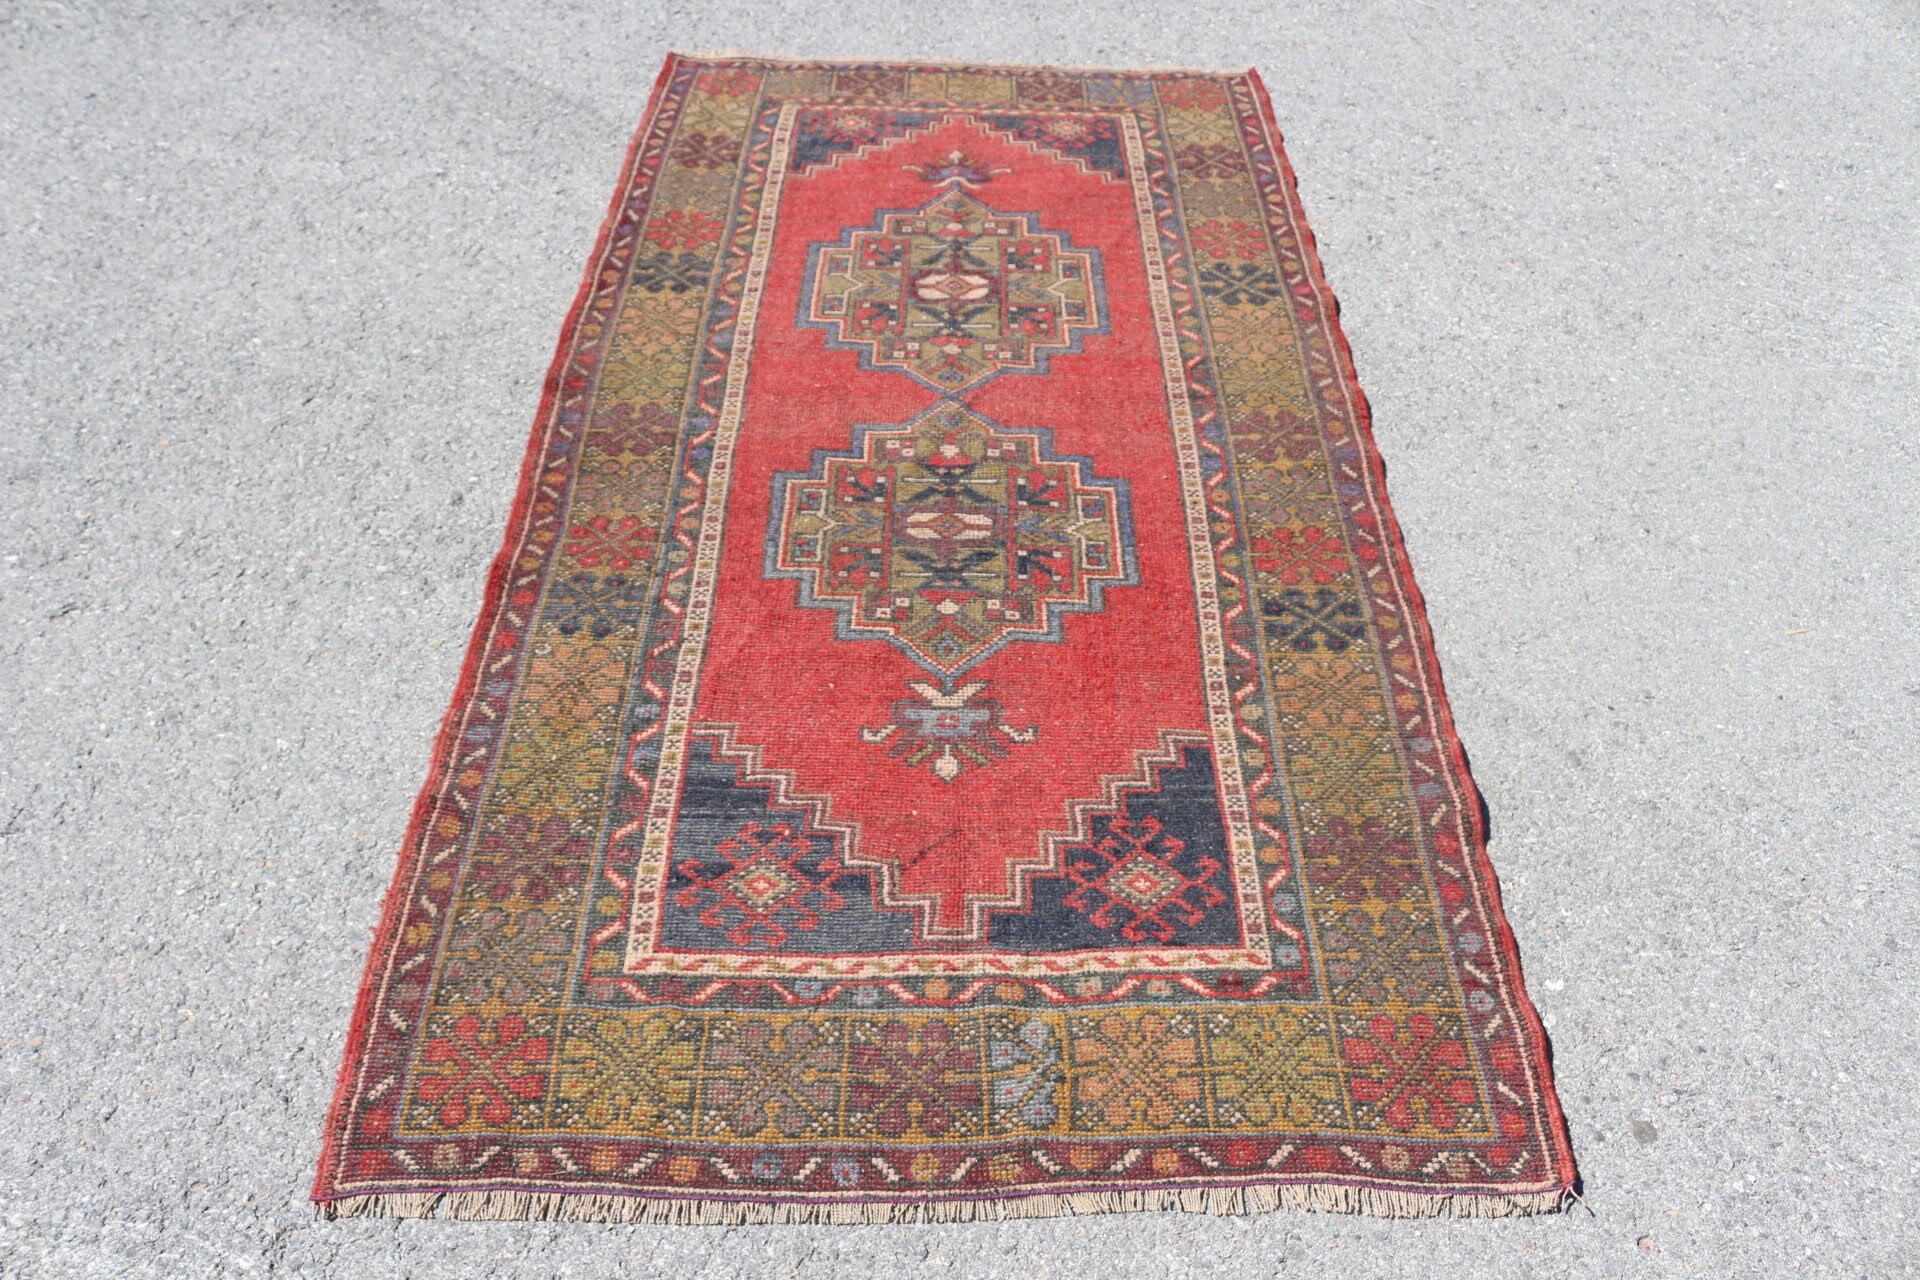 Kitchen Rug, Red Cool Rugs, Home Decor Rug, 3.7x7.1 ft Area Rugs, Antique Rug, Vintage Rug, Indoor Rugs, Turkish Rugs, Rugs for Bedroom